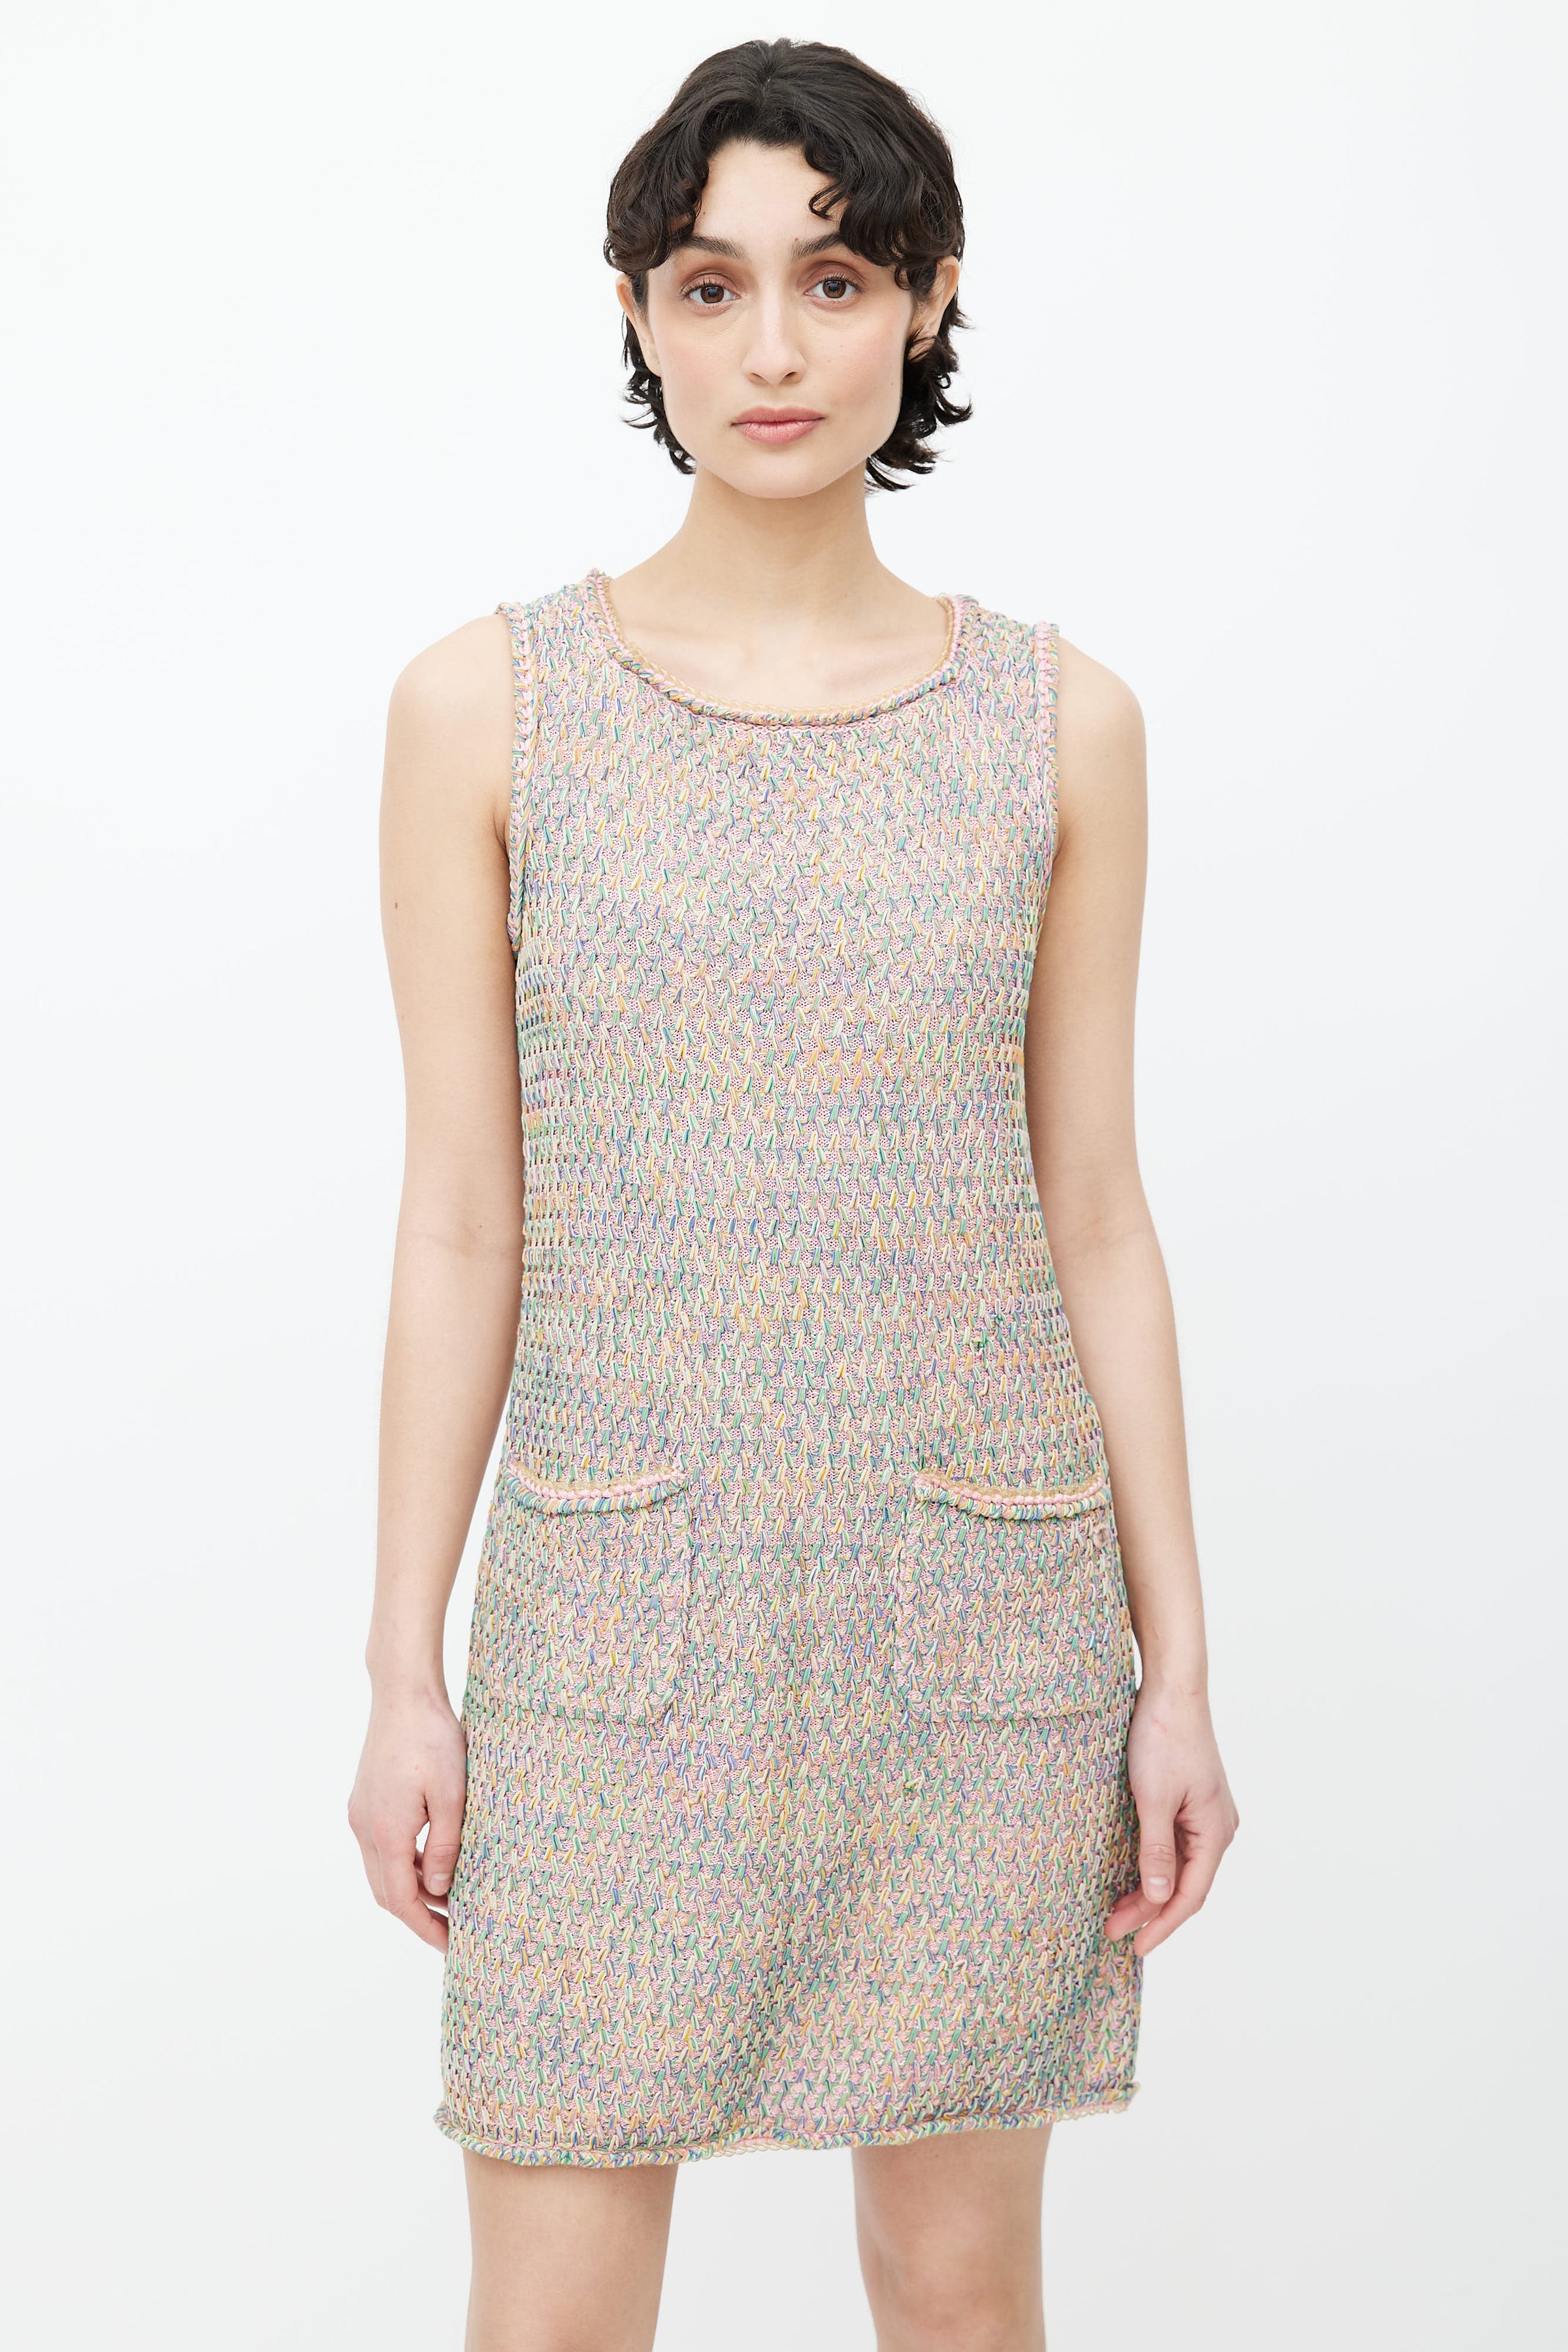 Chanel Multicolor Tweed Pocketed Sleeveless Short Dress M Chanel